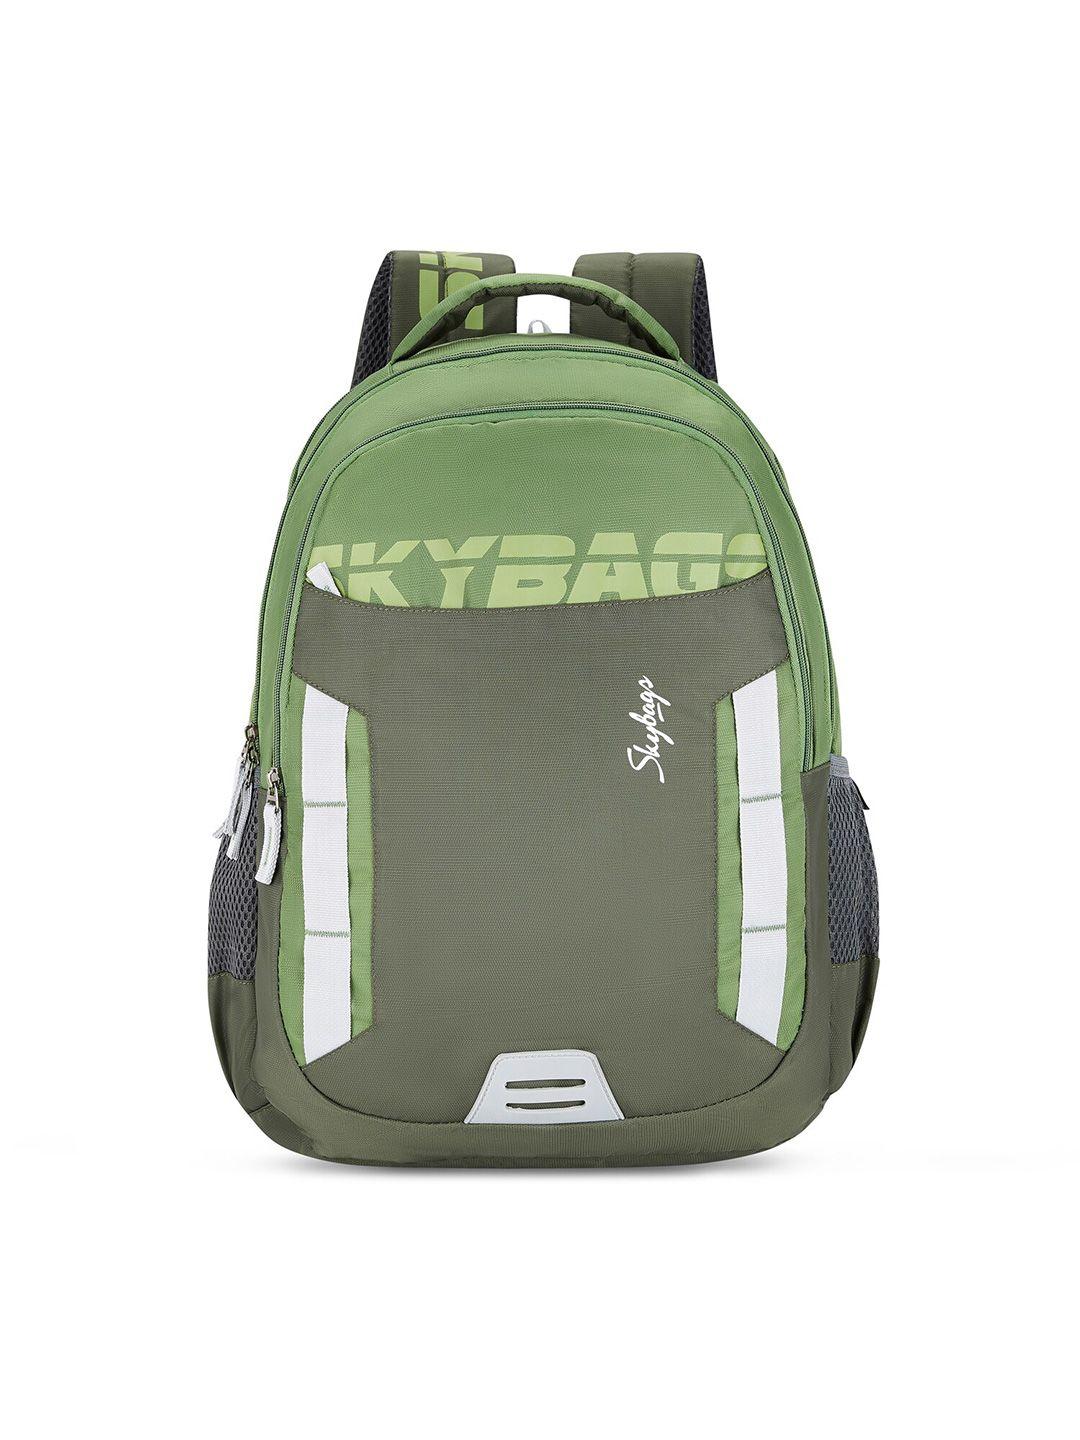 skybags unisex typography printed backpack